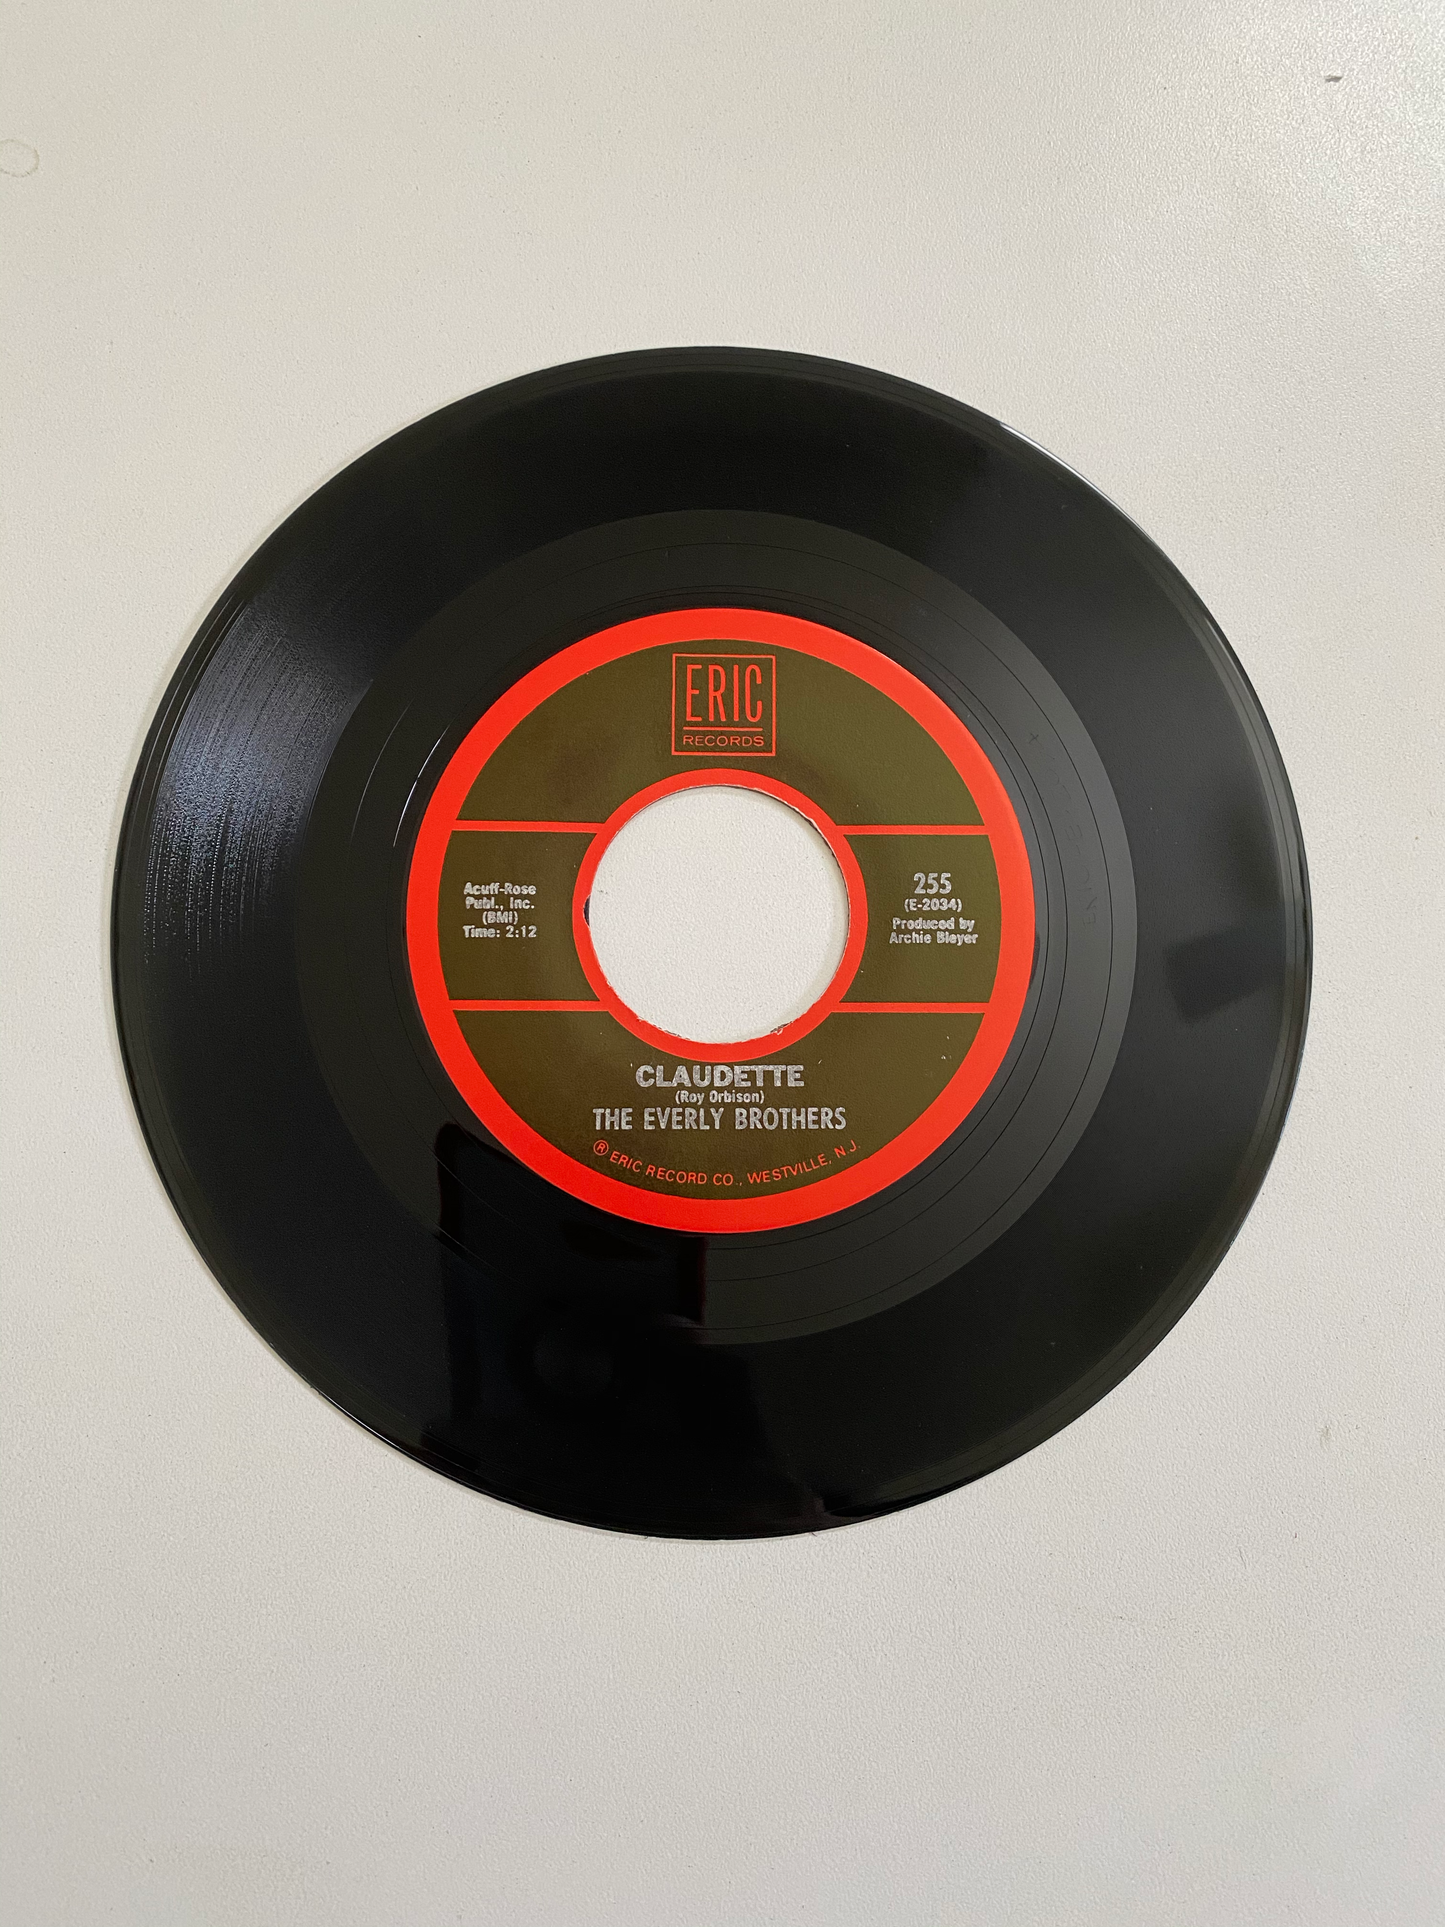 Everly Brothers, The - All I Have to Do is Dream | 45 The Vintedge Co.